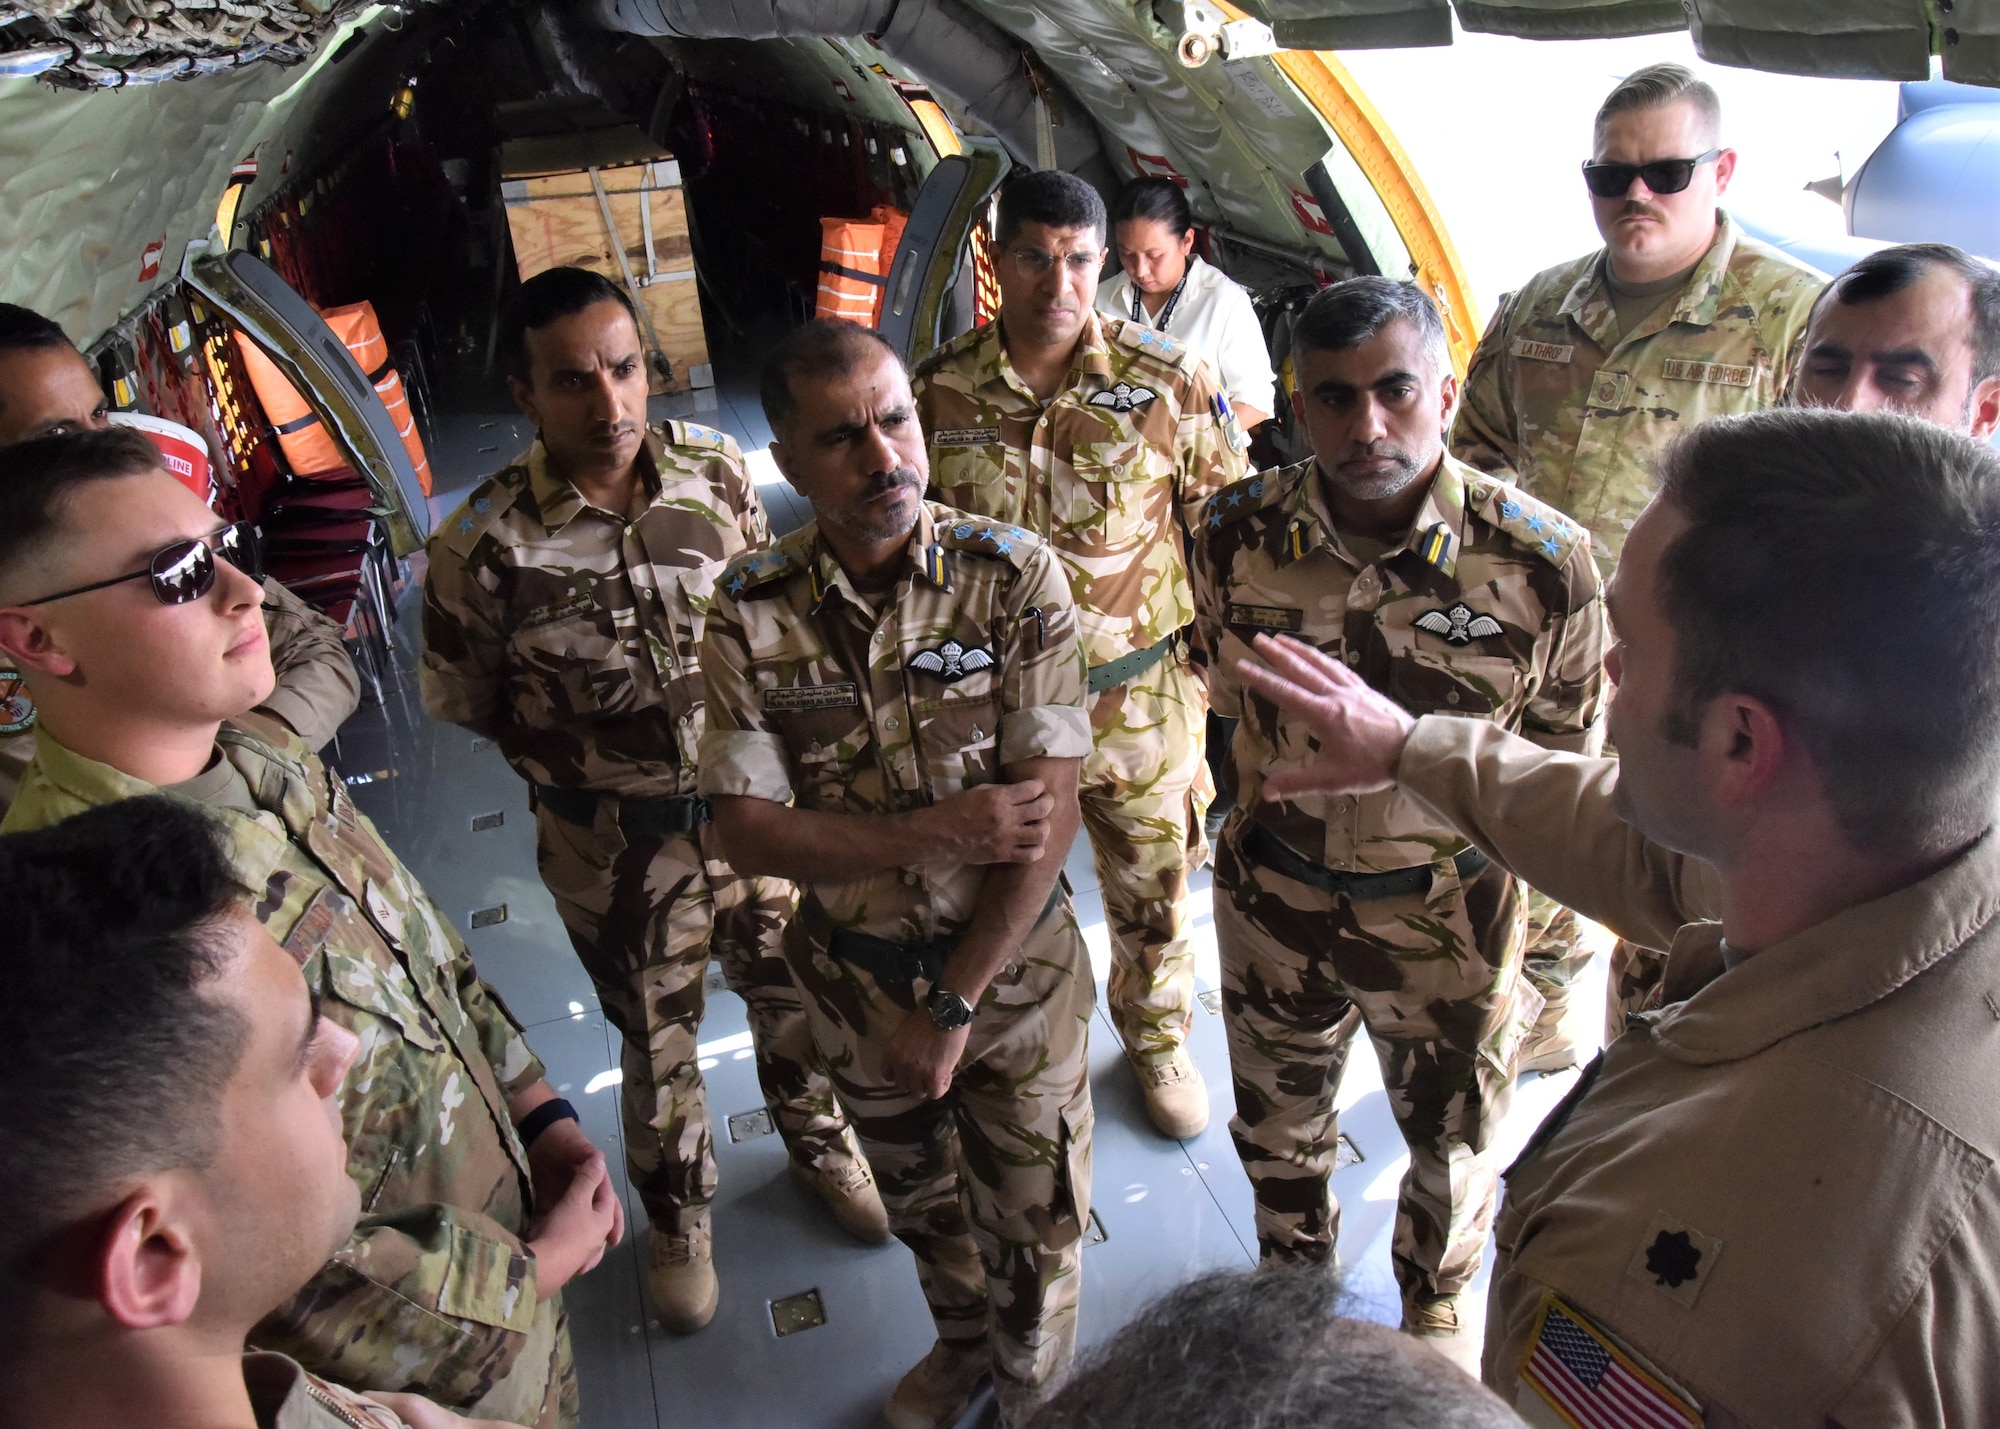 U.S. Air Force Lt. Col. Eric Wolf, 912th Expeditionary Air Refueling Squadron operations officer, discusses the KC-135R Stratotanker mission to members of the Royal Air Force of Oman during a visit May 9, 2023, at Al Udeid Air Base, Qatar. The visit served to provide ideas and recommendations to update and modernize the RAFO force and headquarters, and allowed for discussions on increased partnership opportunities for interoperability and strategic competition. (U.S. Air Force photo by Staff Sgt. Daniel Brosam)